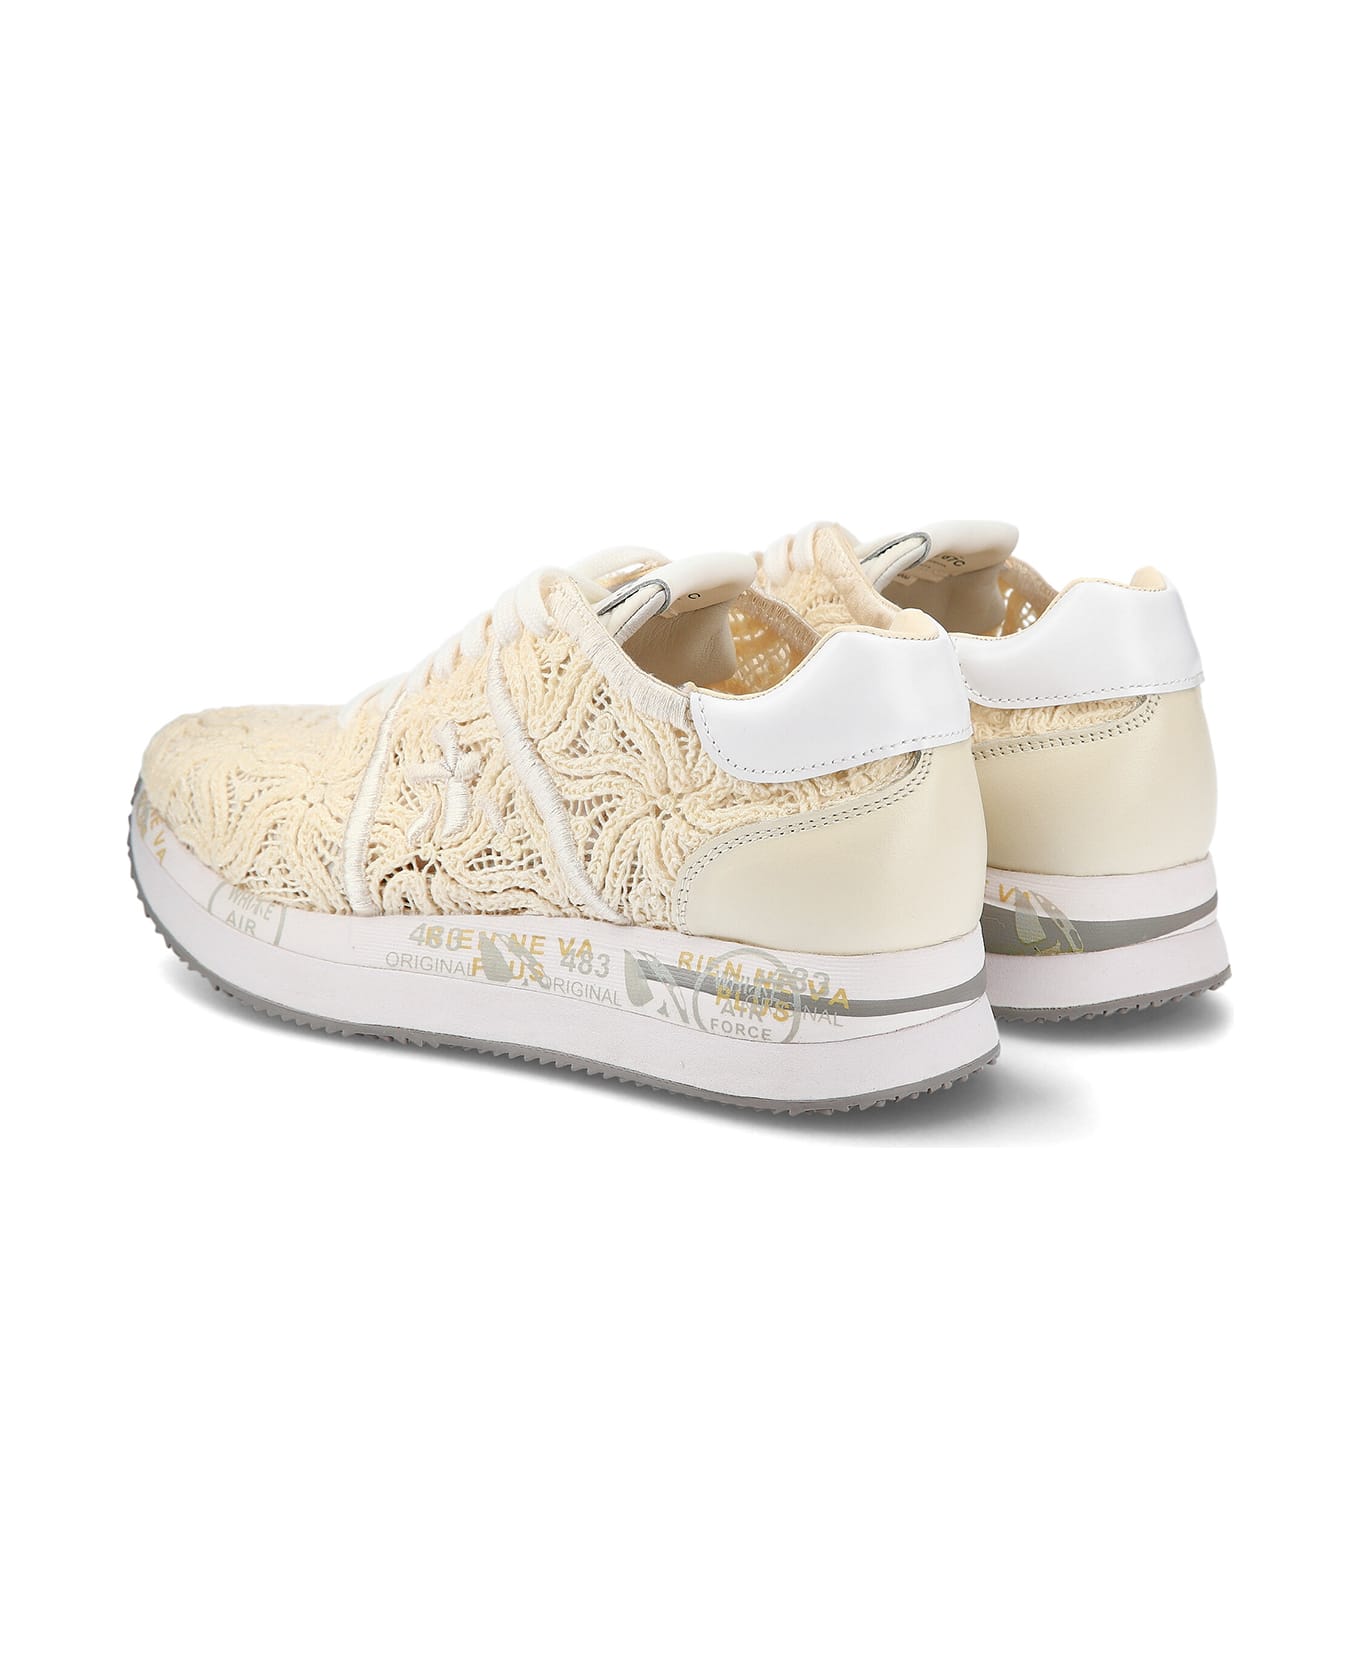 Premiata Conny 6787 Perforated Sneaker - NUDE スニーカー